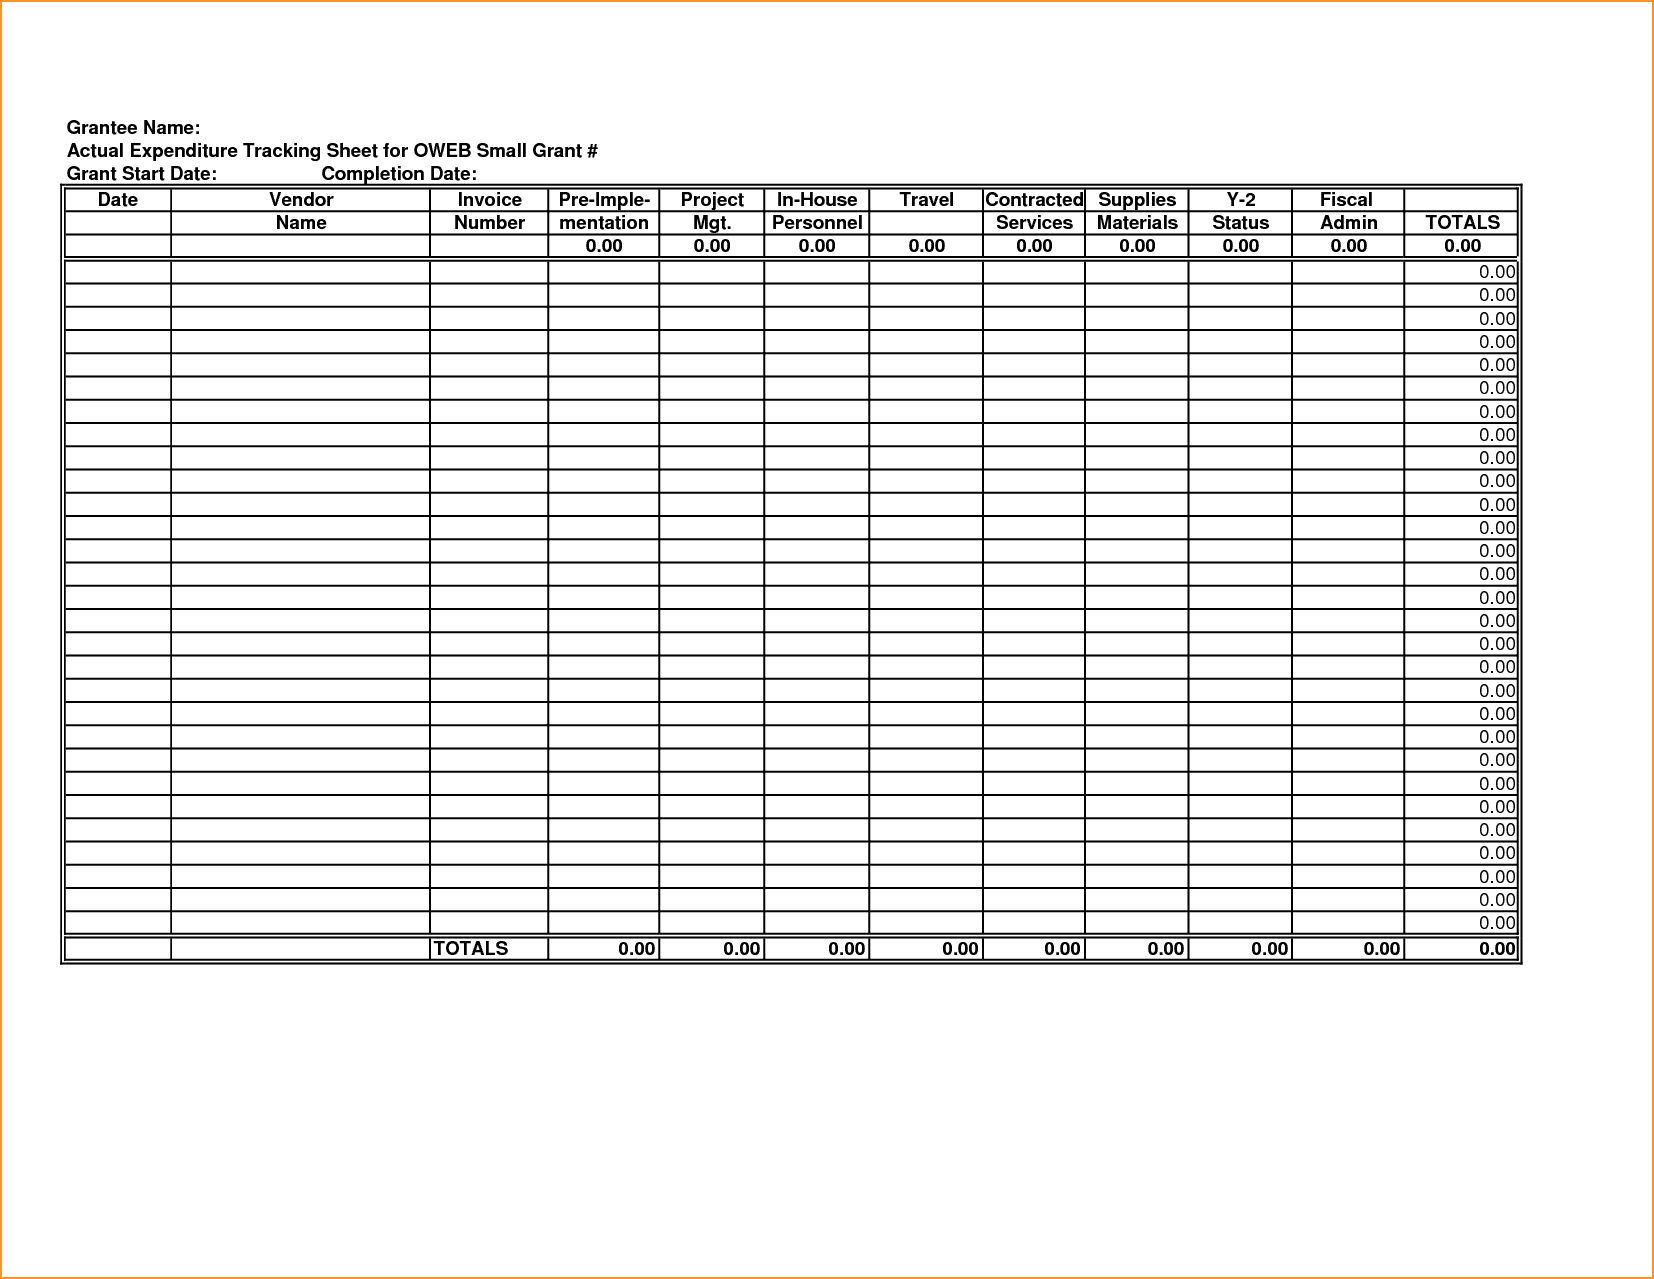 daily income and expense excel sheet